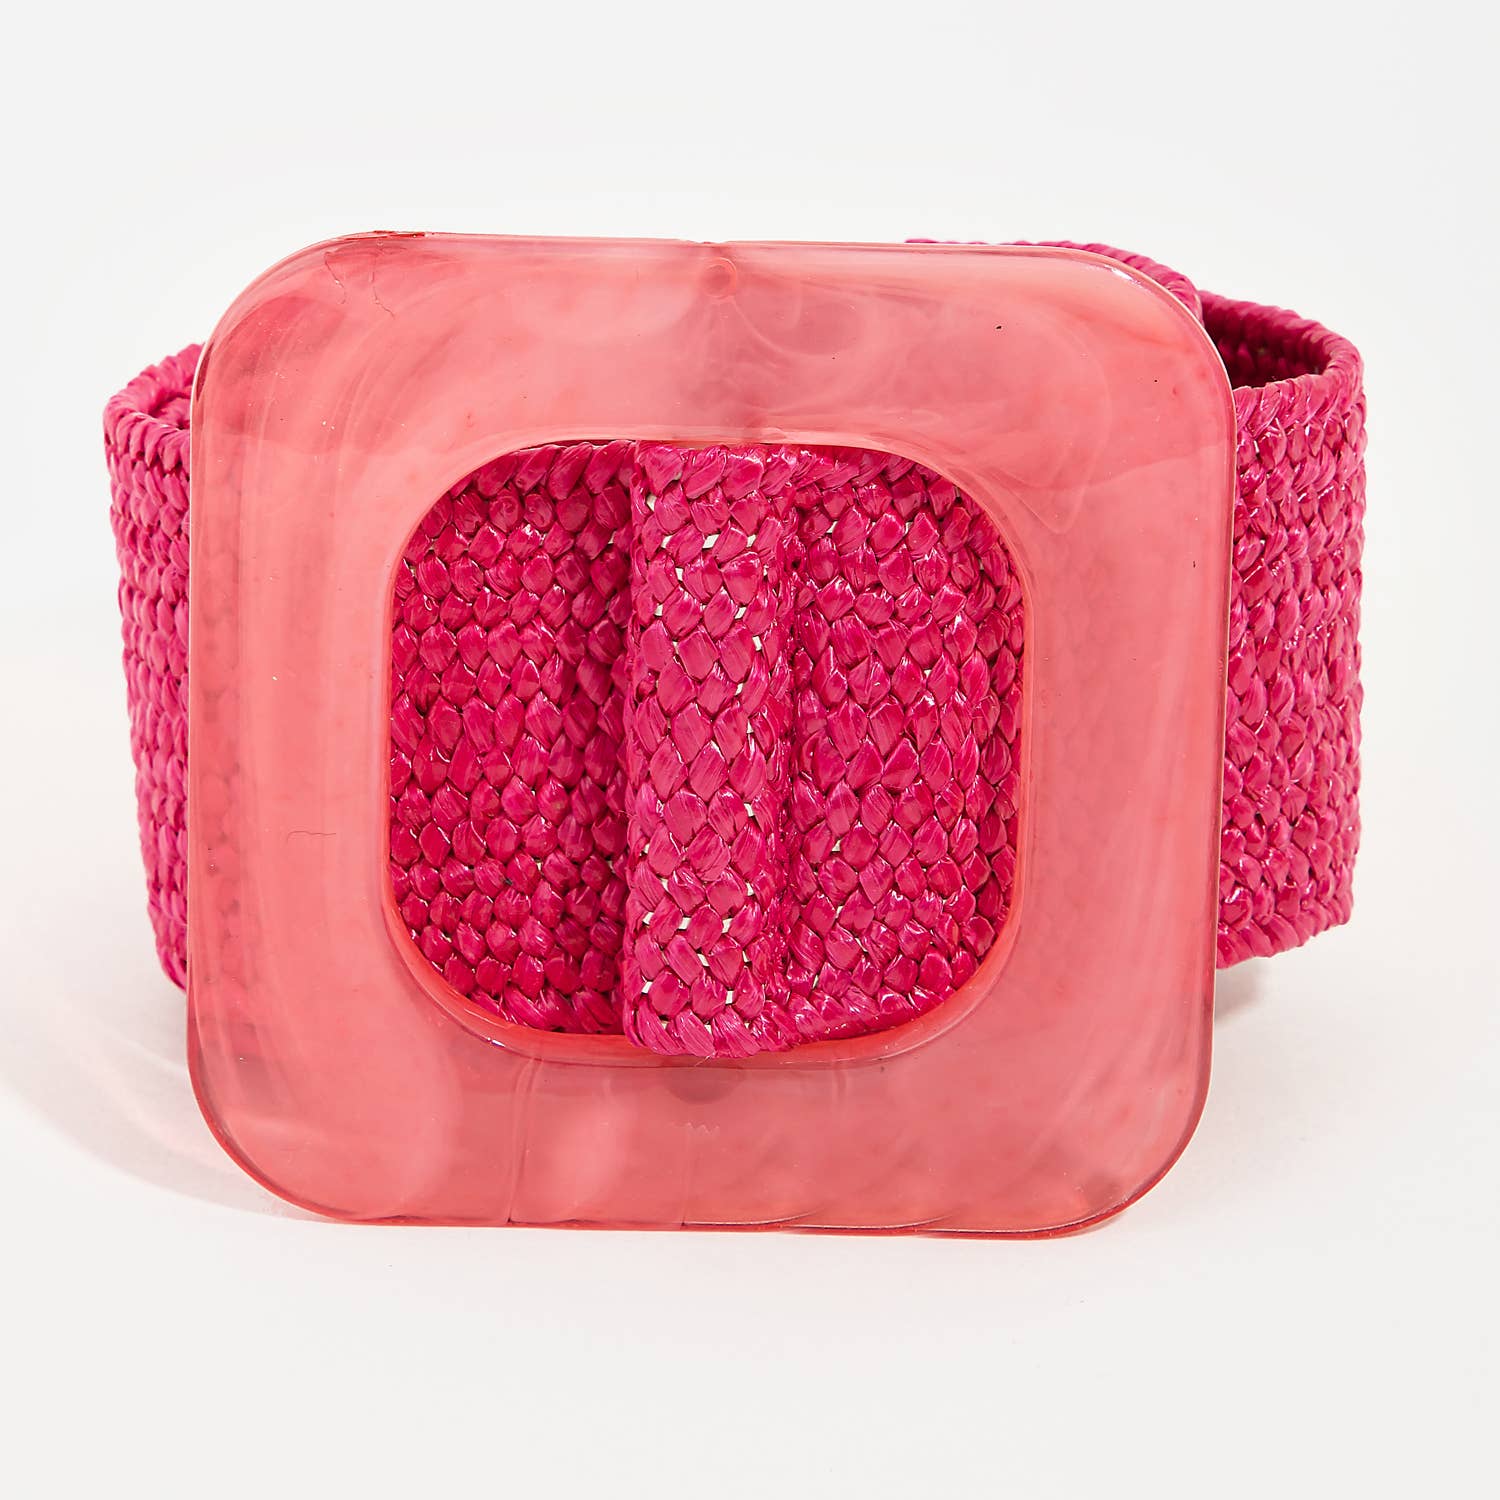 Acetate Buckle Braided Elastic Belt - Fuchsia Misc Accessories Collections by Fame Accessories   